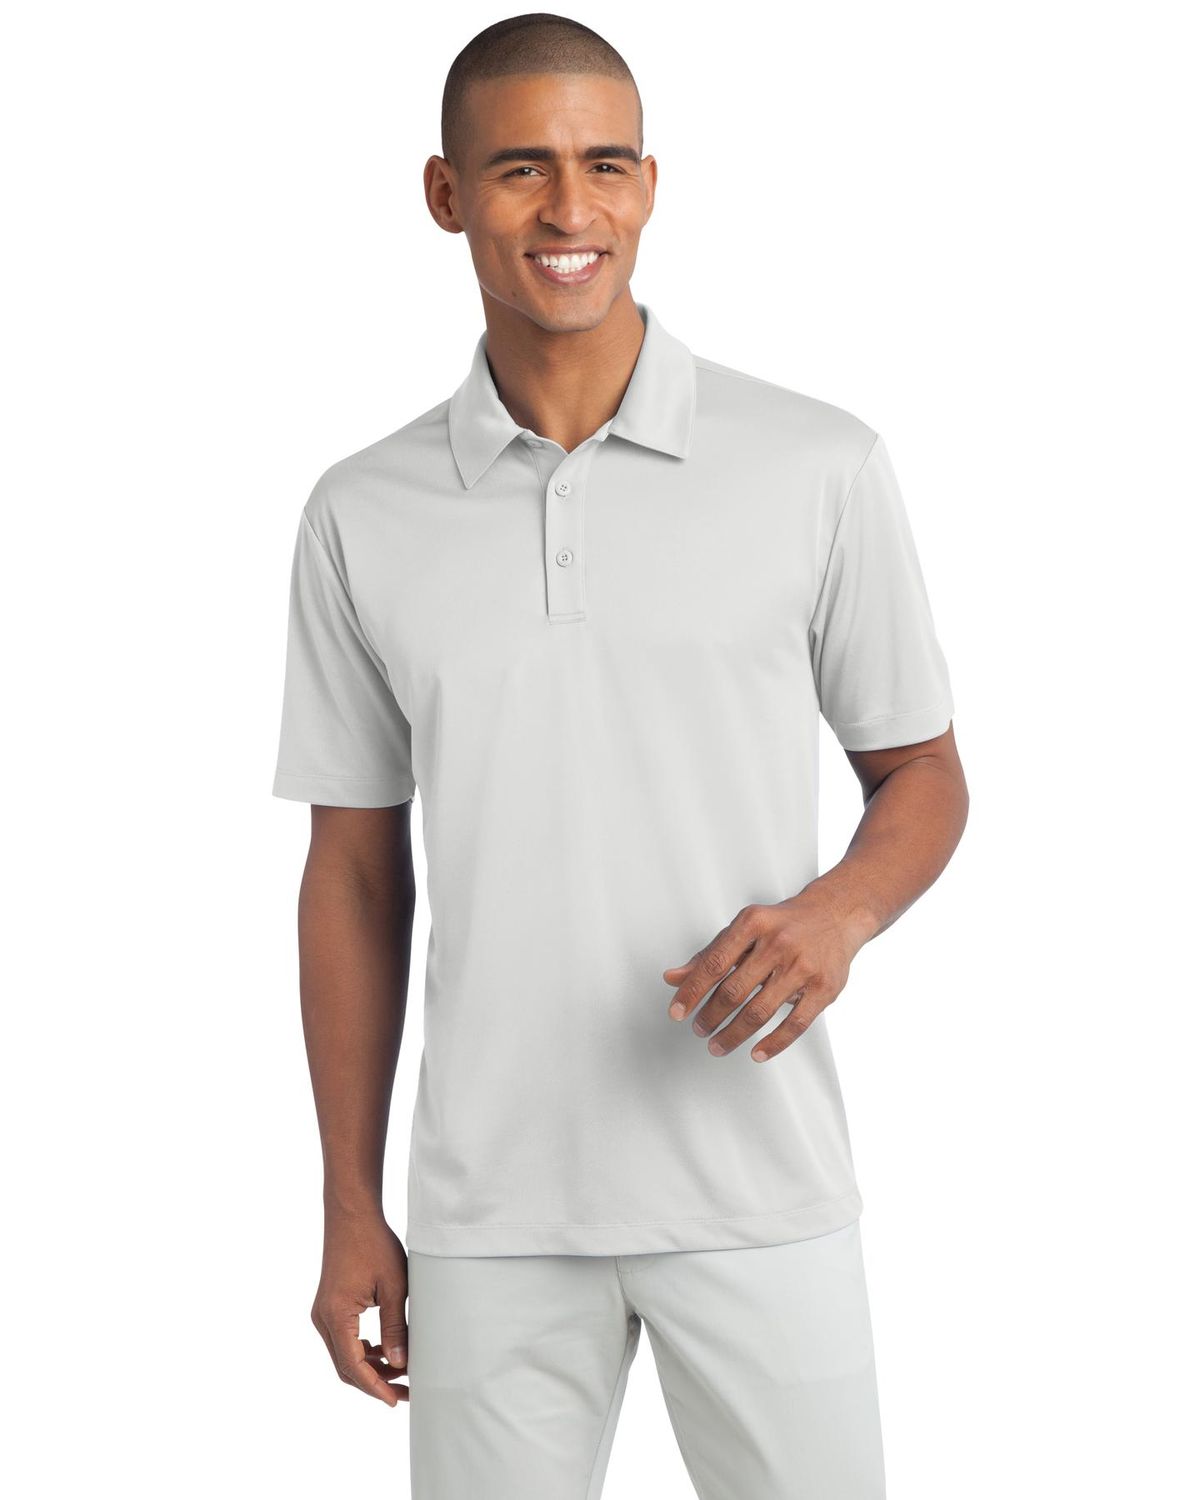 'Port Authority K540 Silk Touch Performance Polo Shirt'